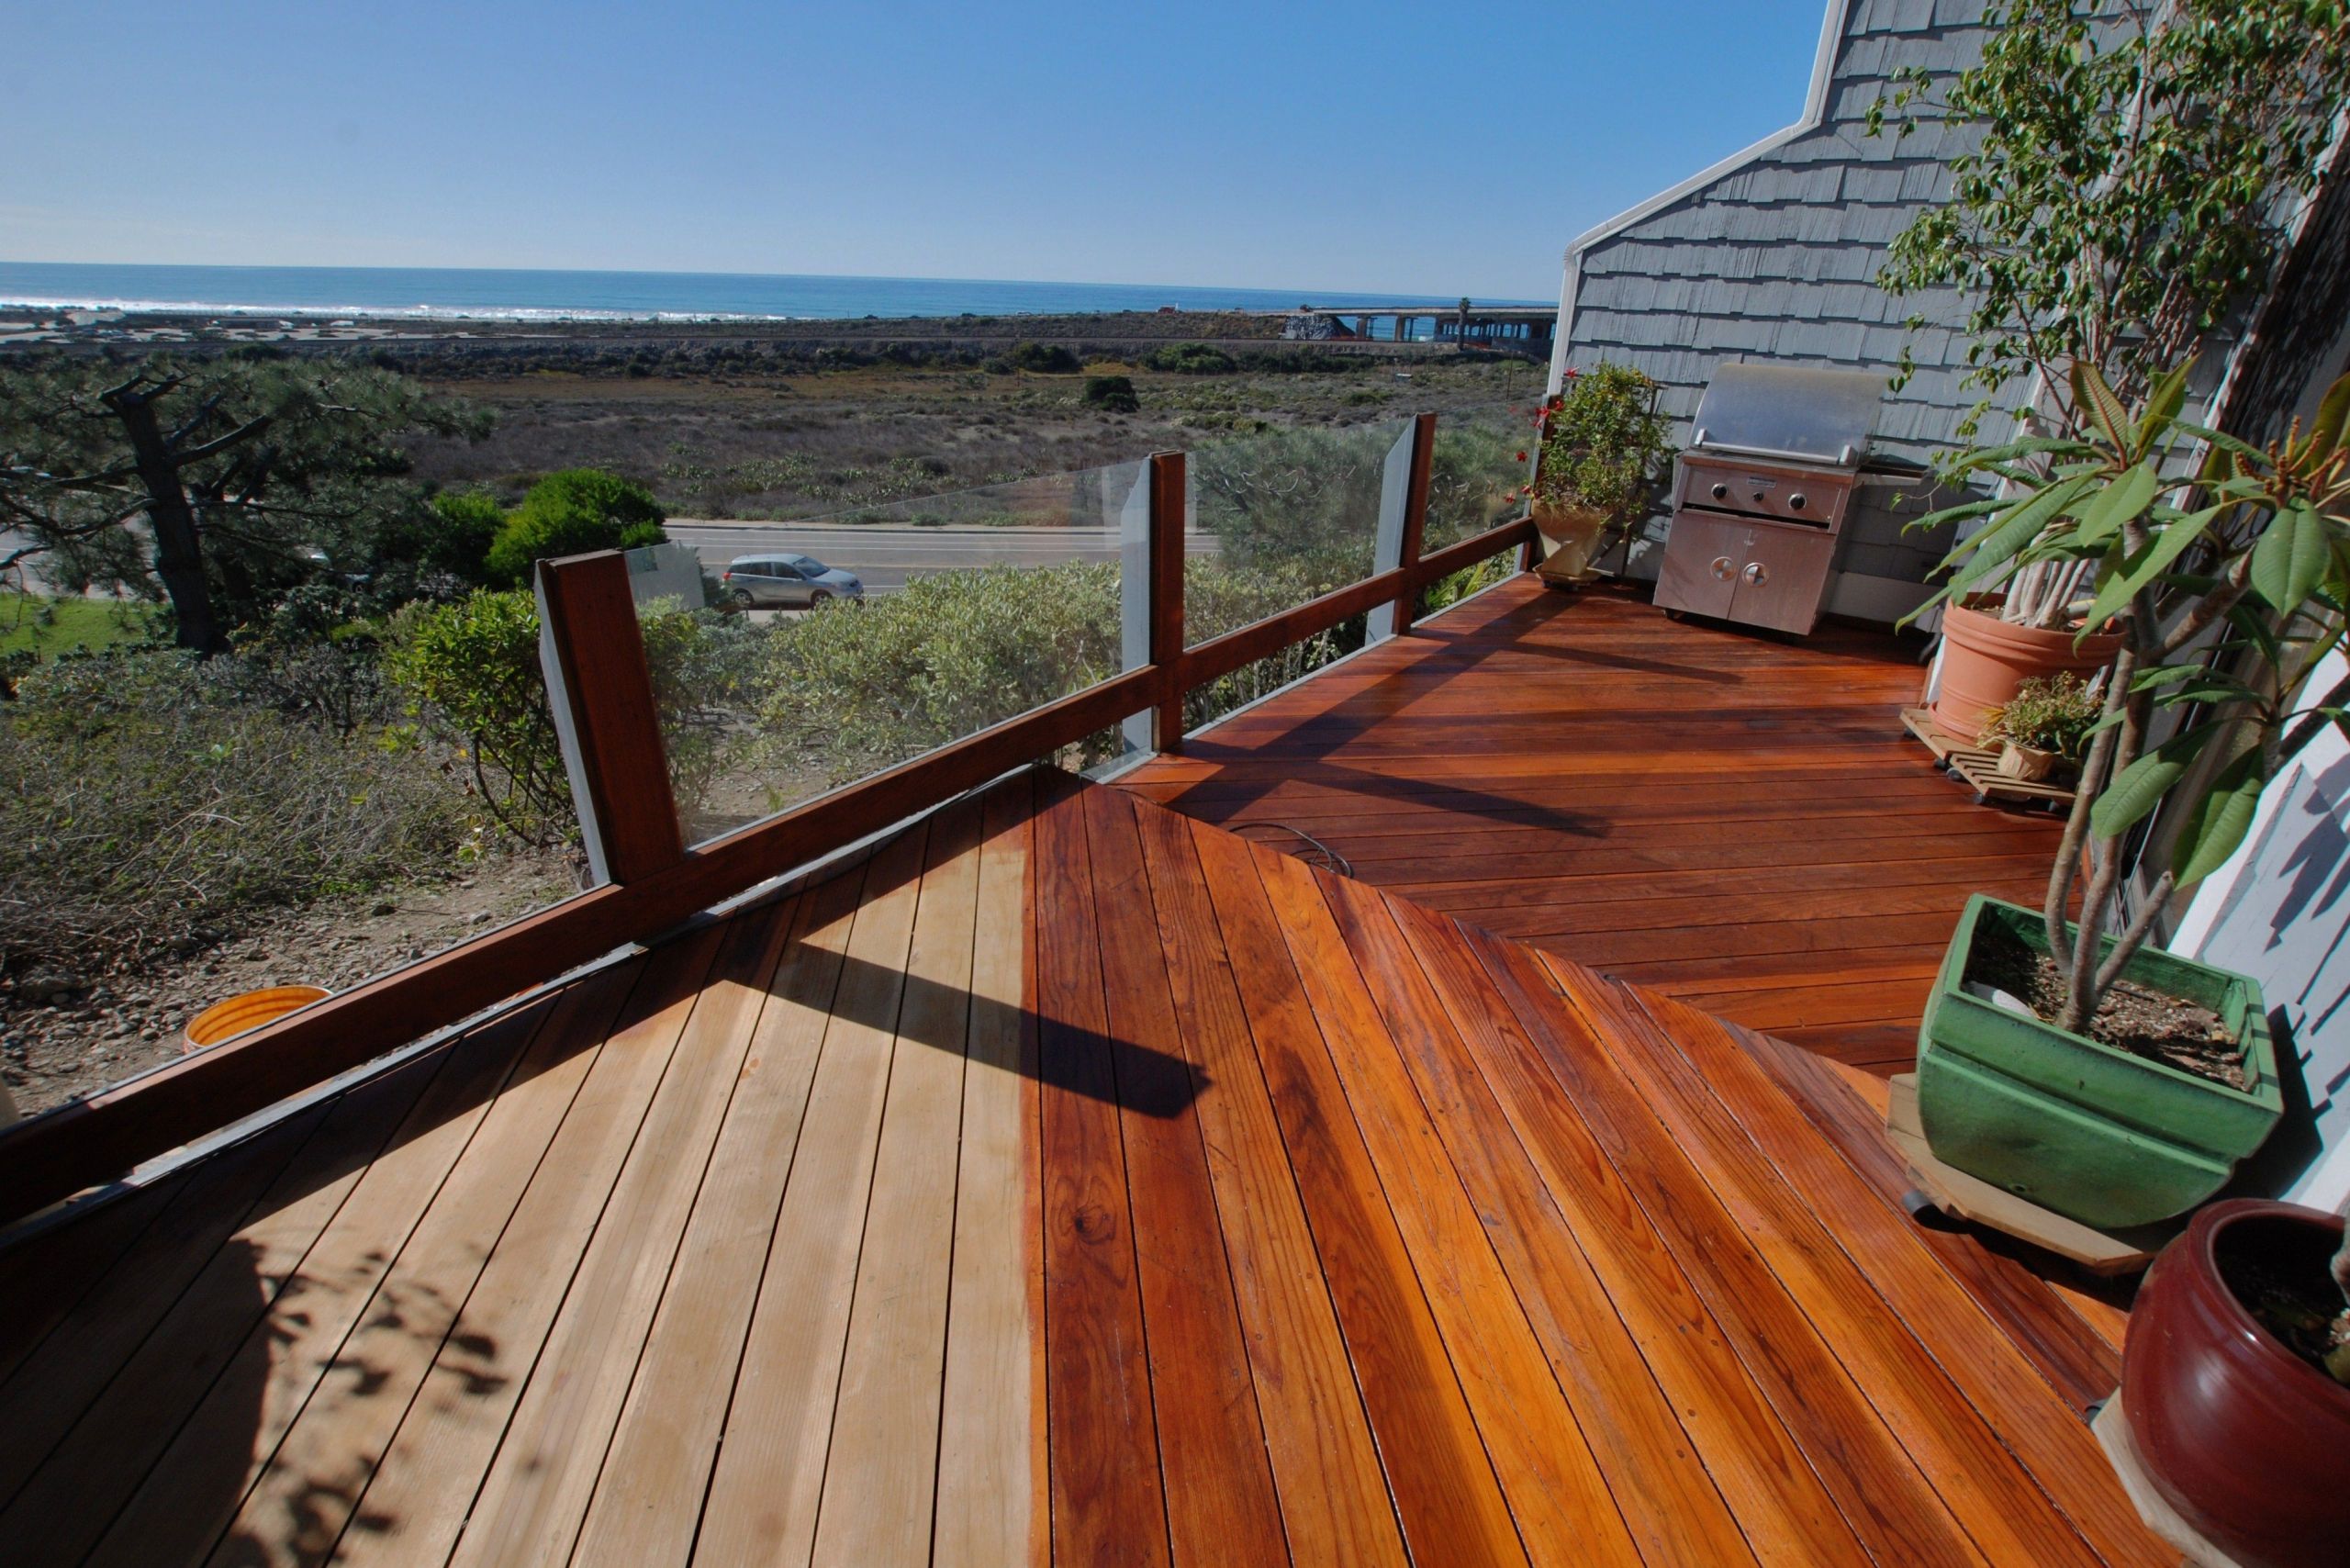 Sherwin Williams Deck Paint Reviews
 Decks Sherwin Williams Superdeck For Coloring Your Deck